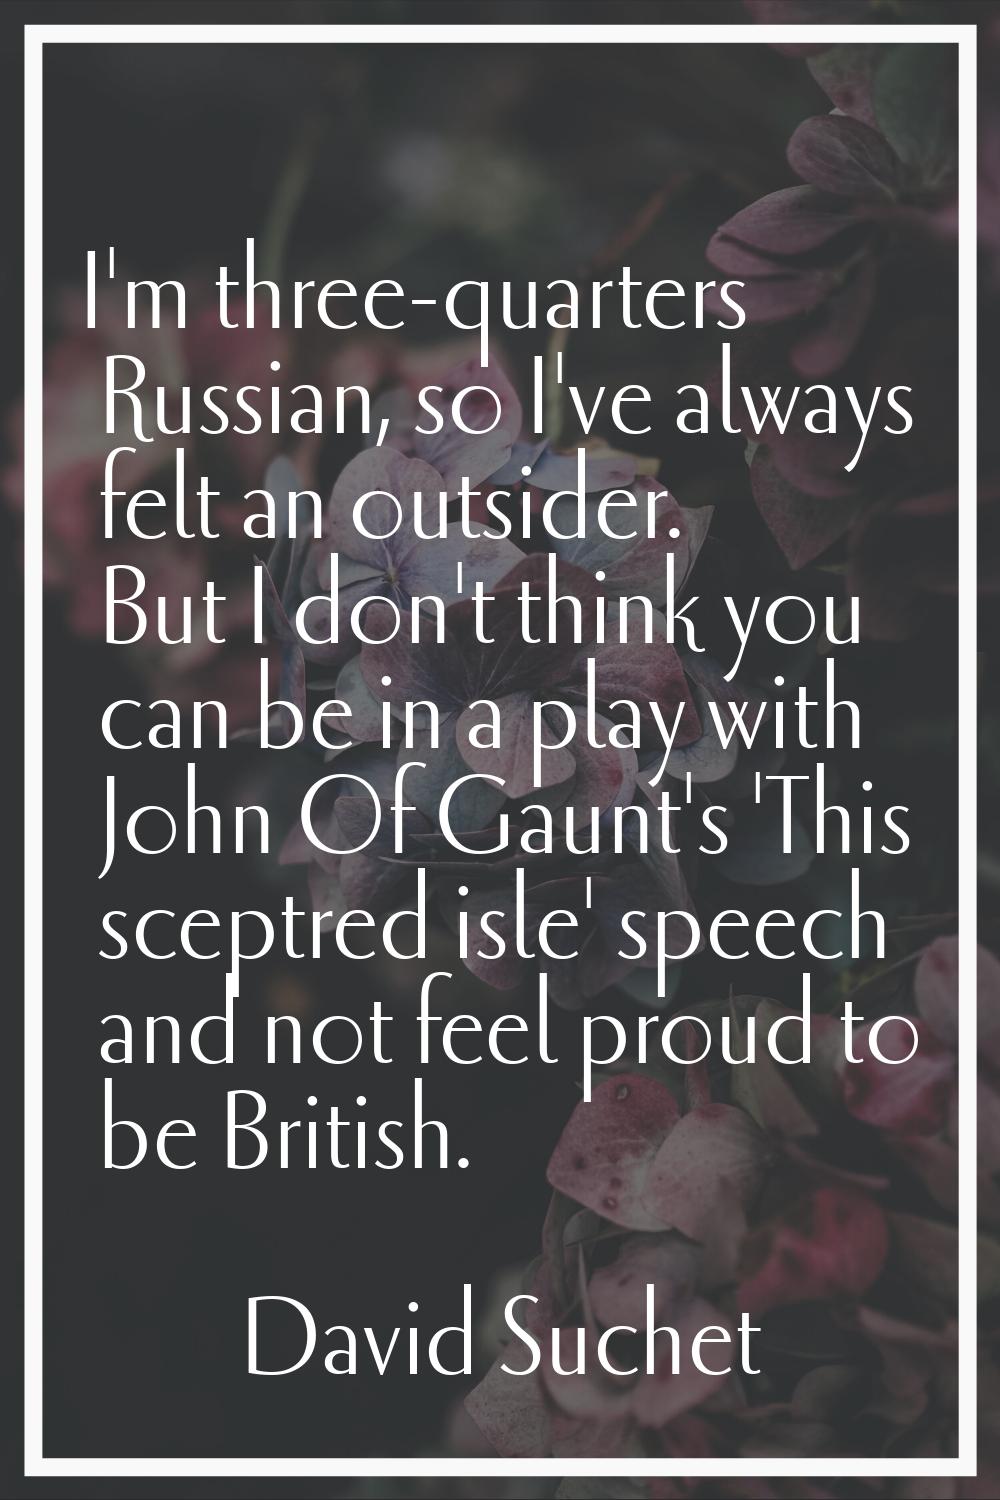 I'm three-quarters Russian, so I've always felt an outsider. But I don't think you can be in a play